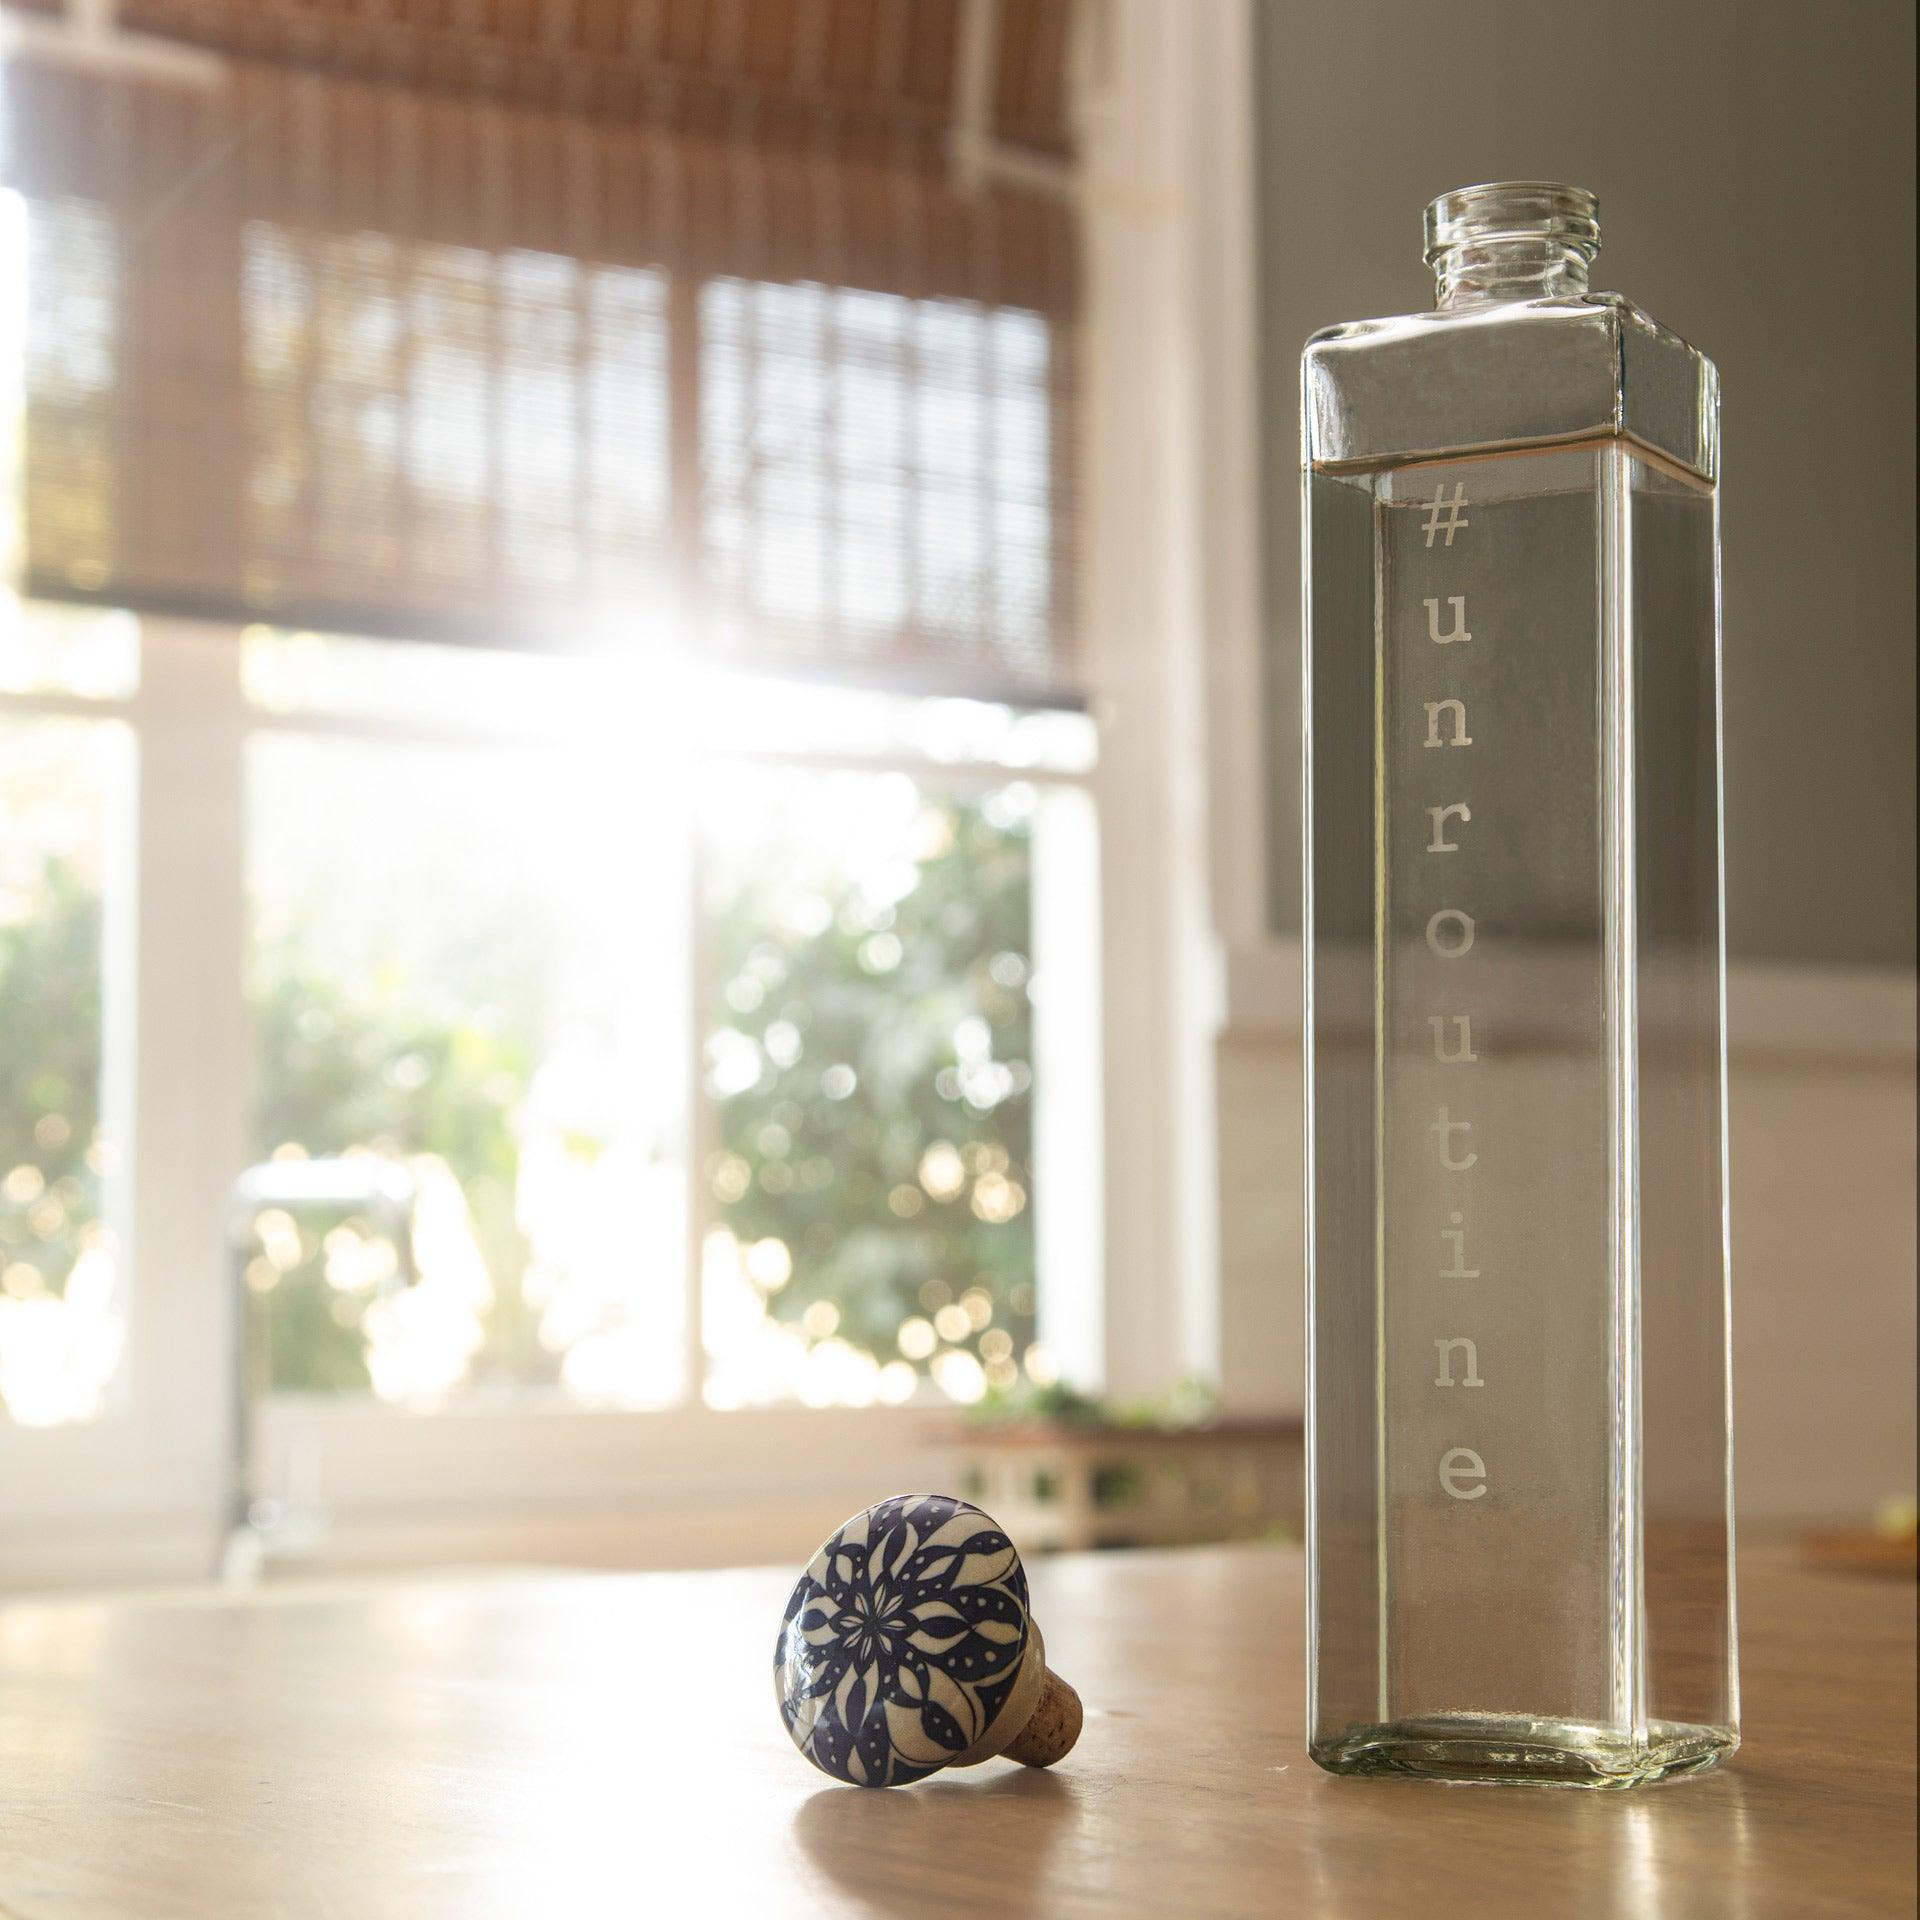 Square glass water bottle with ceramic stopper